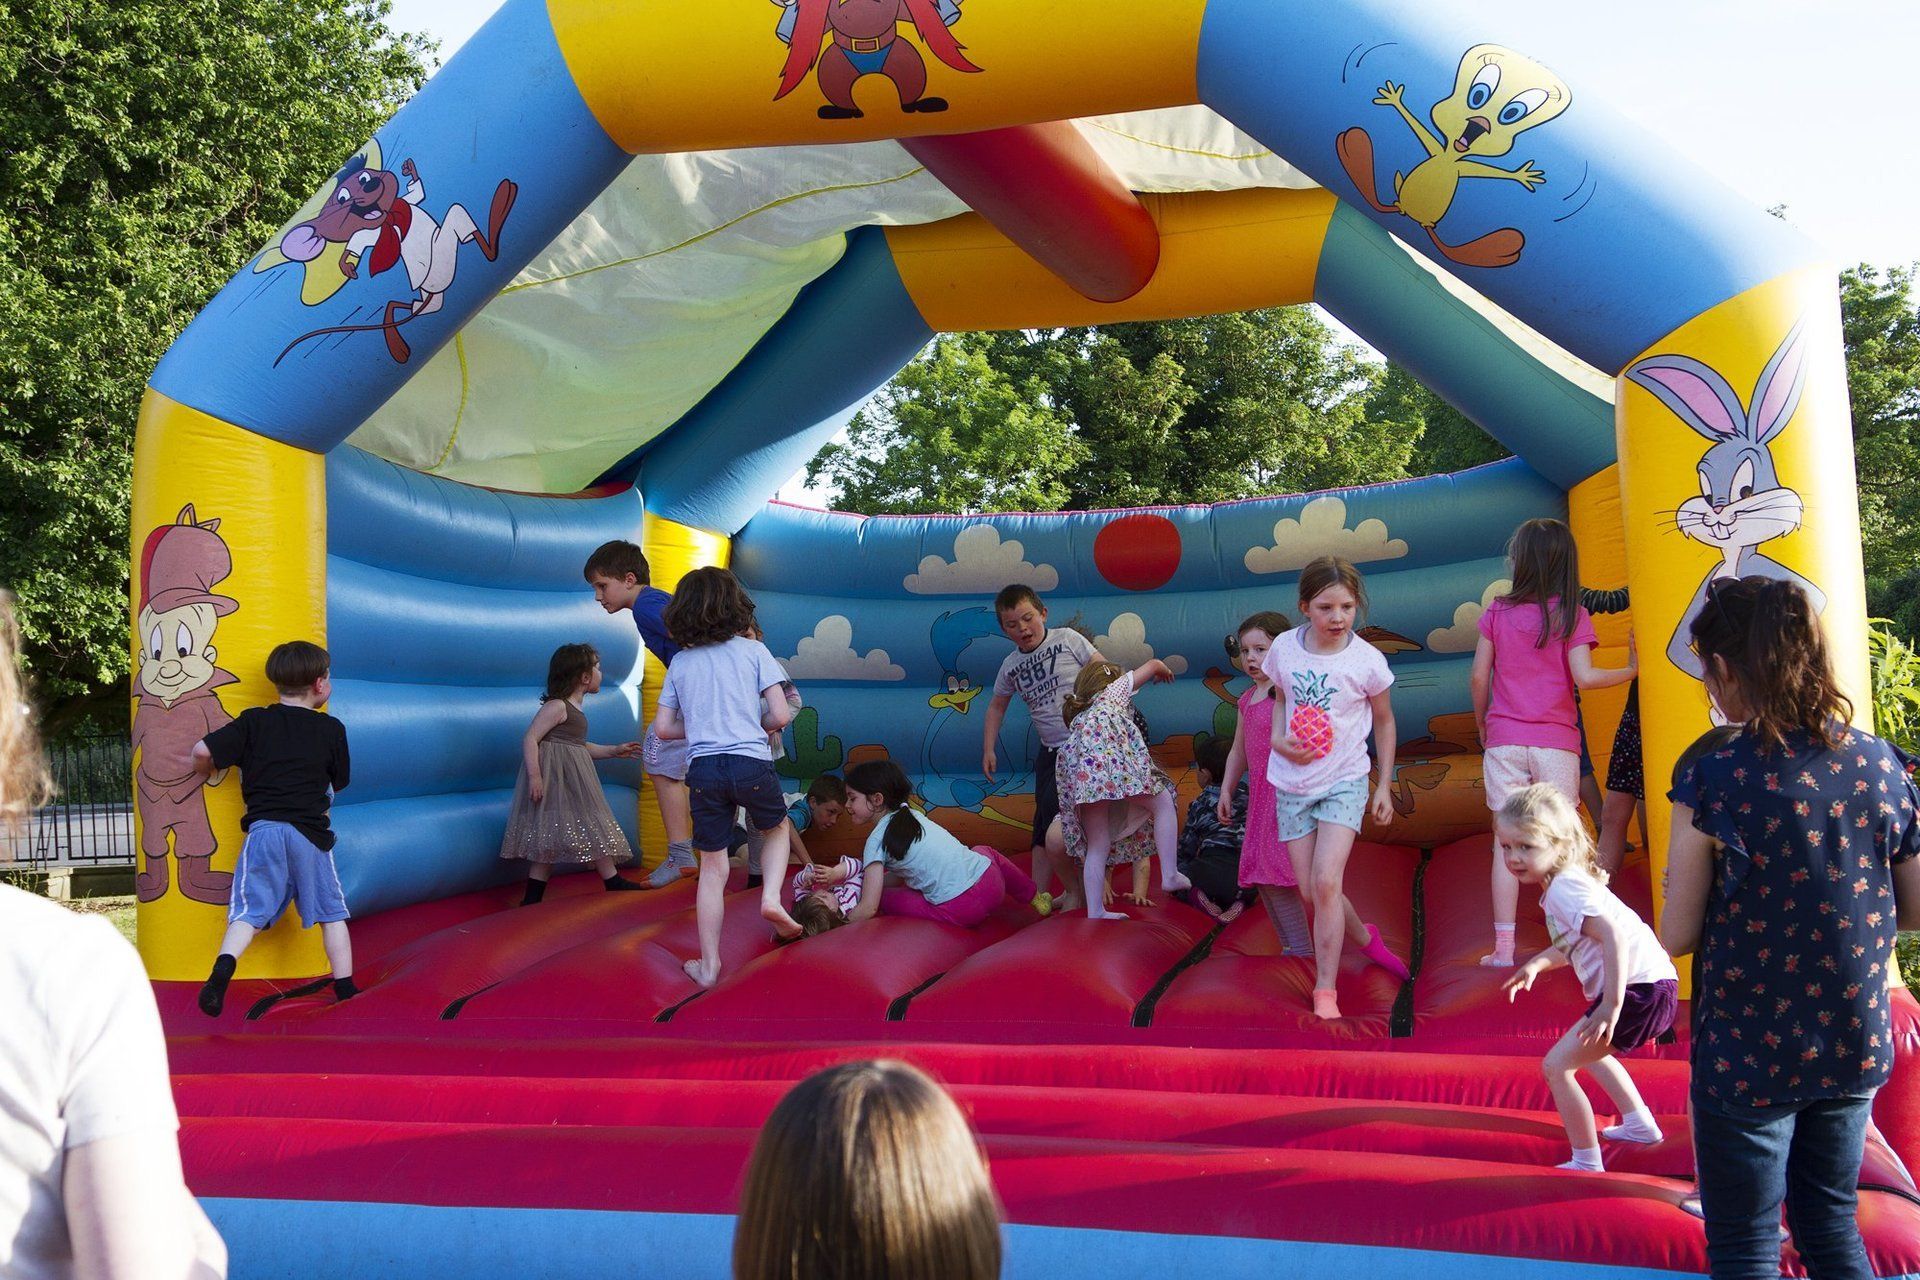 A group of children are playing in a bouncy house